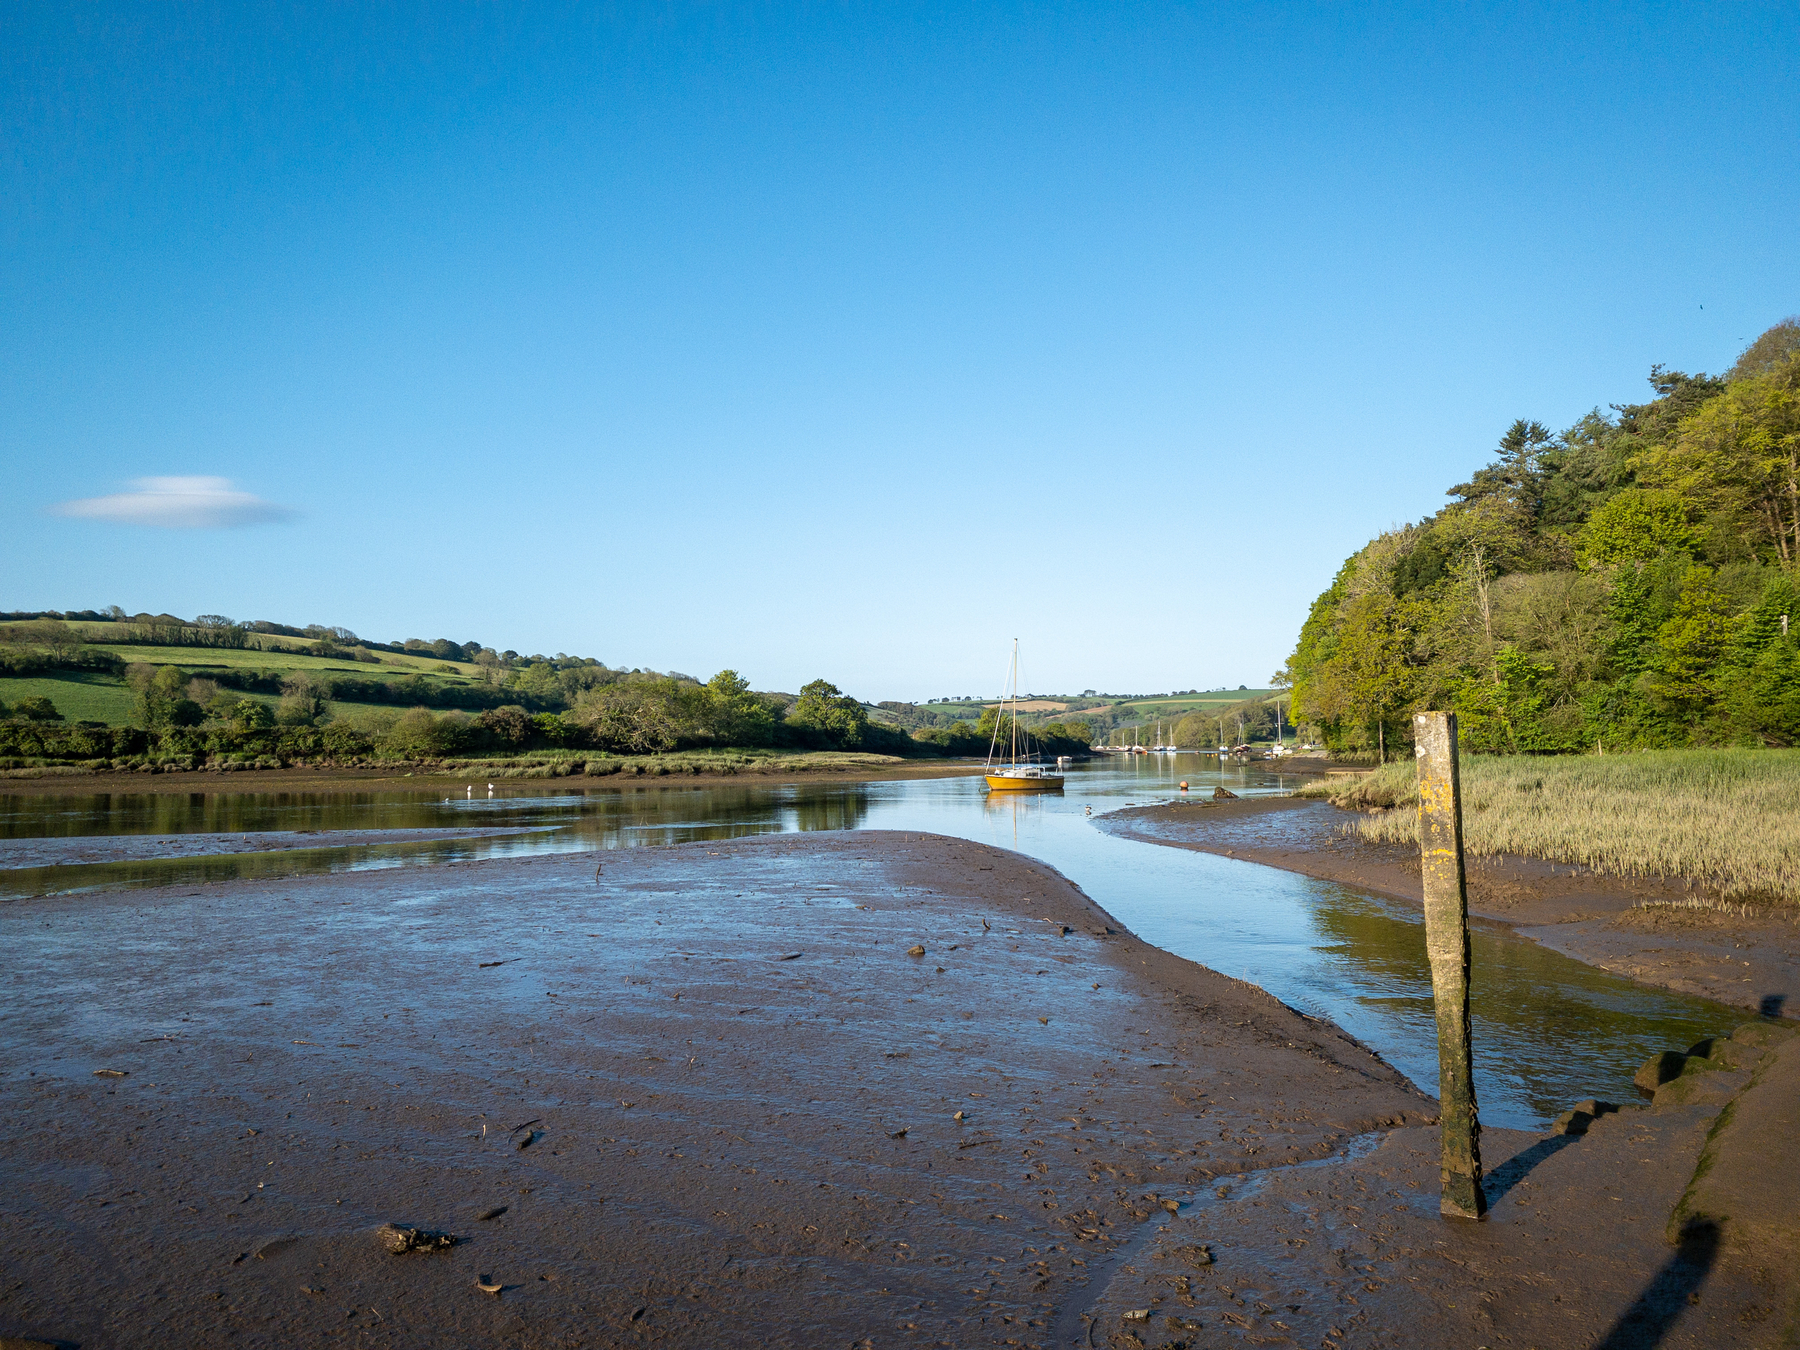 photo of an estuary at low tide with mud banks